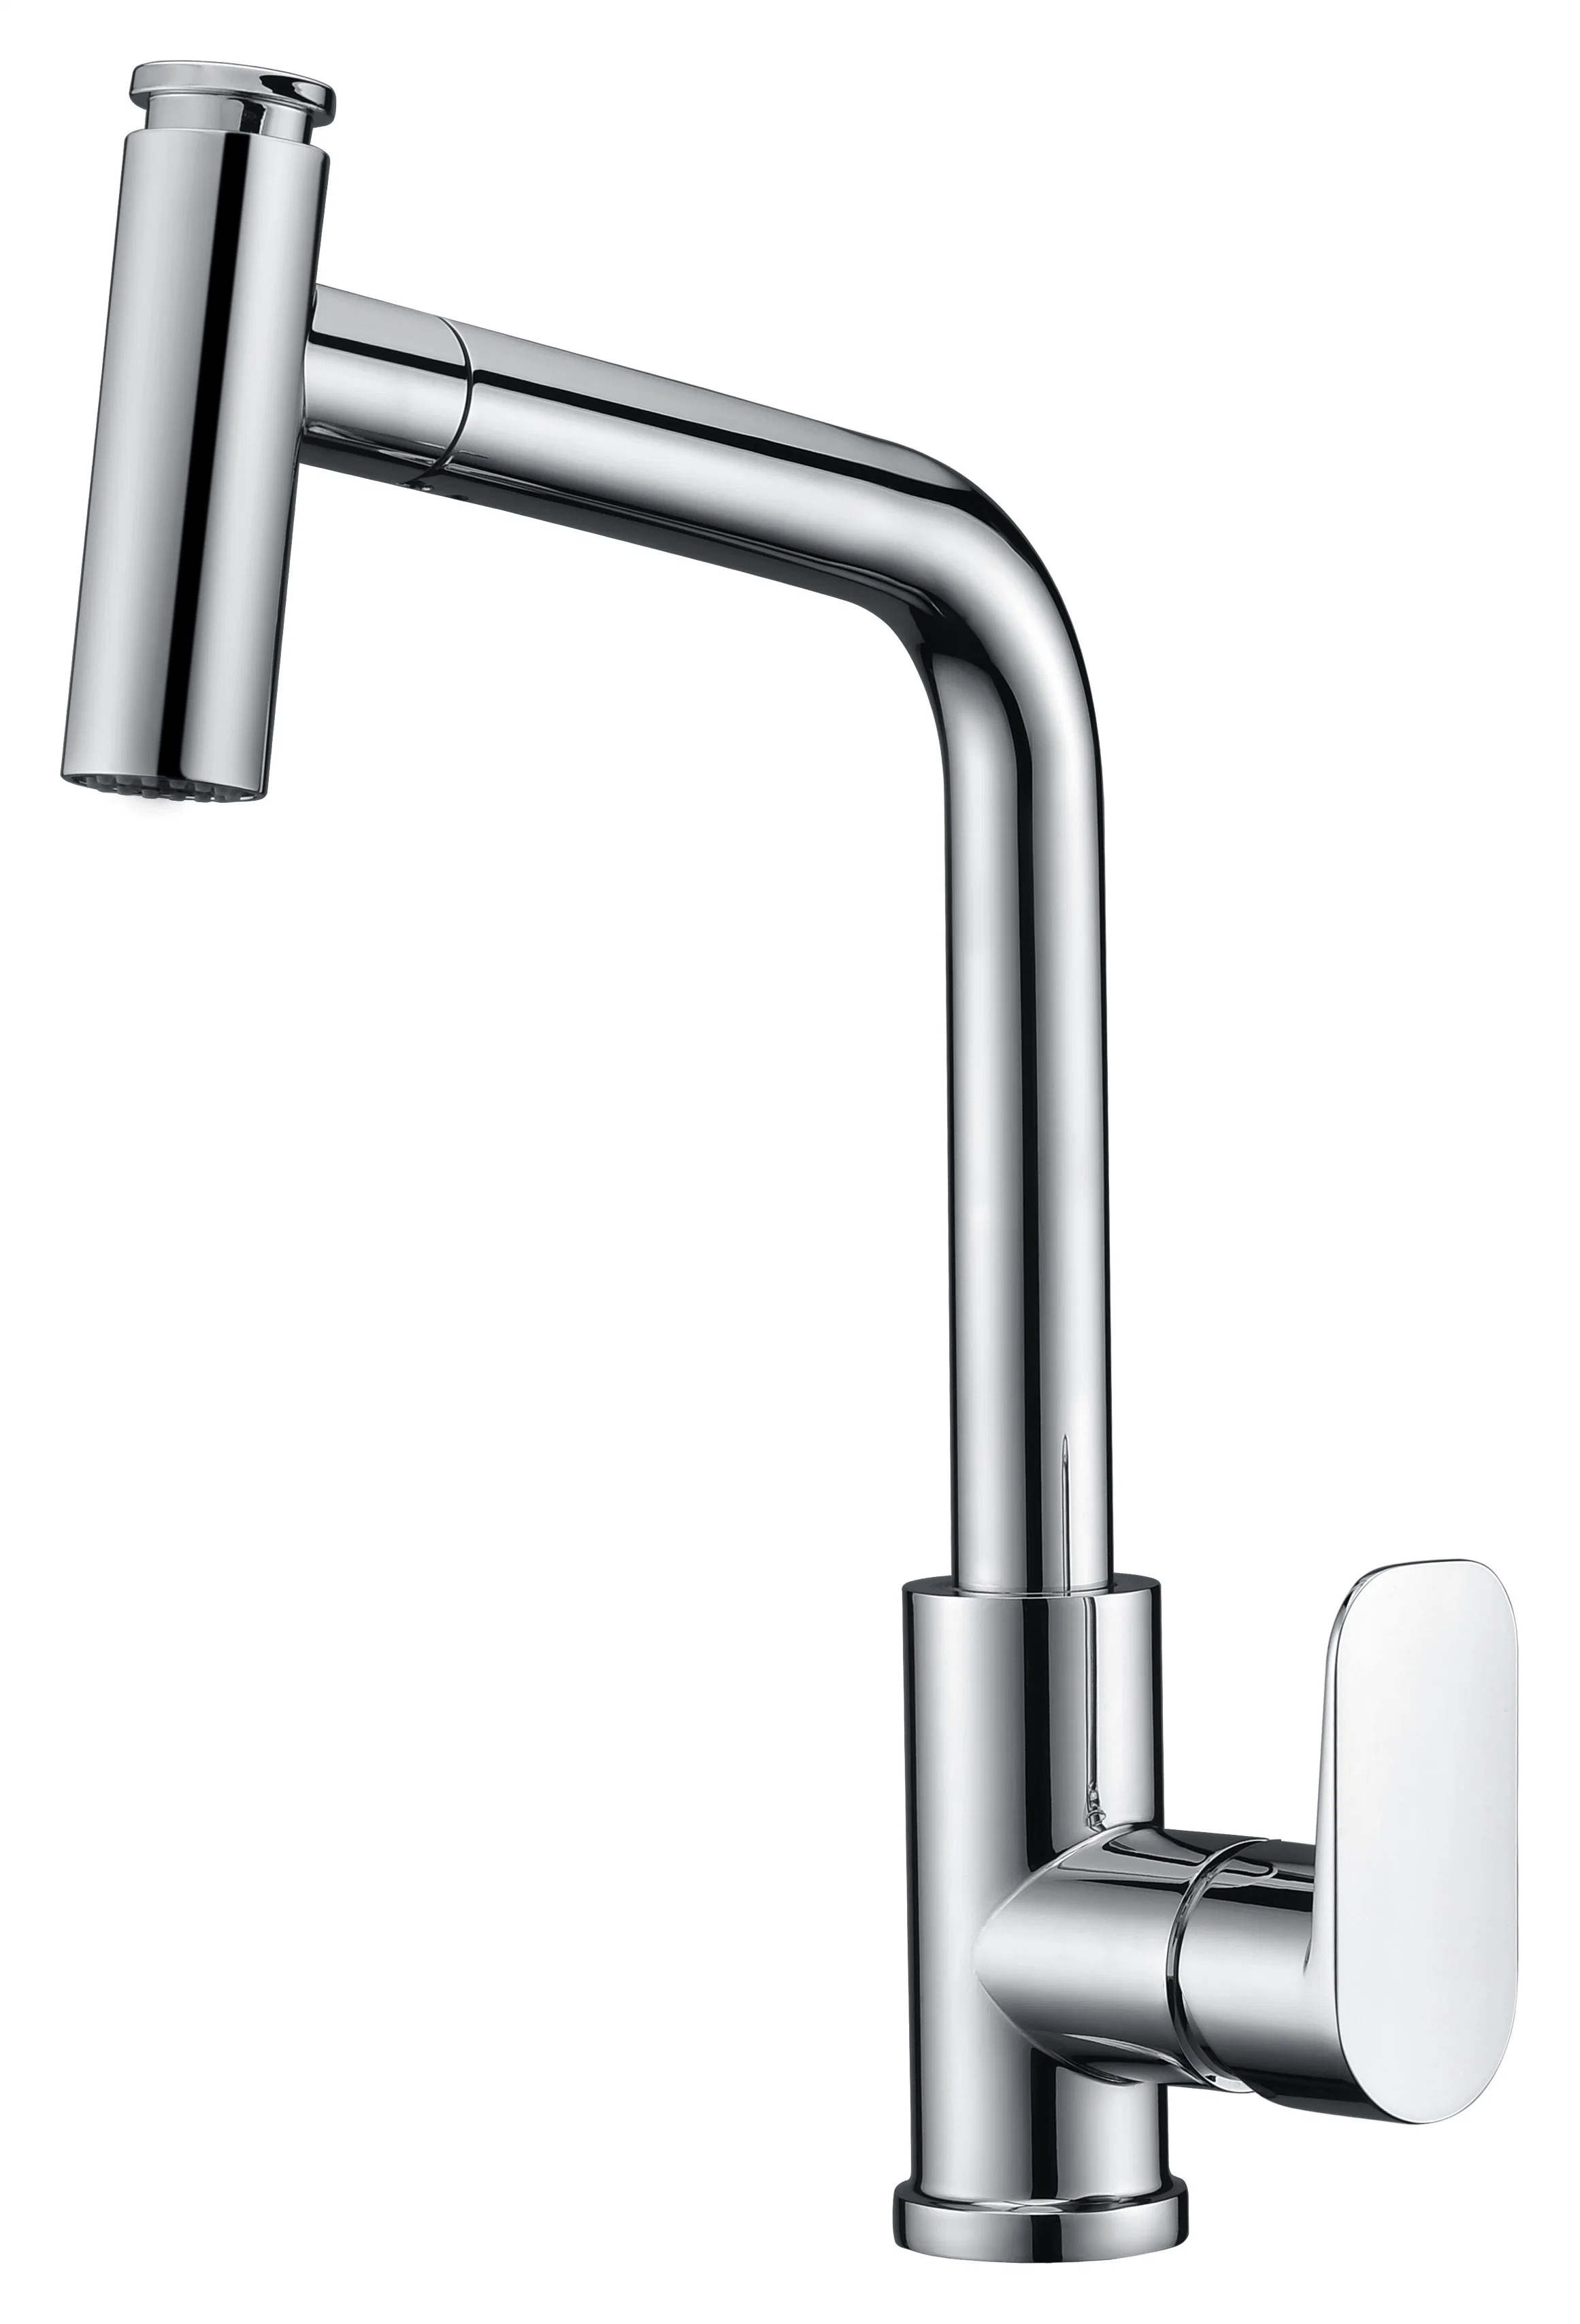 Single Lever Kitchen Mixer with Pulled out Head Sink Tap Brass Mixer